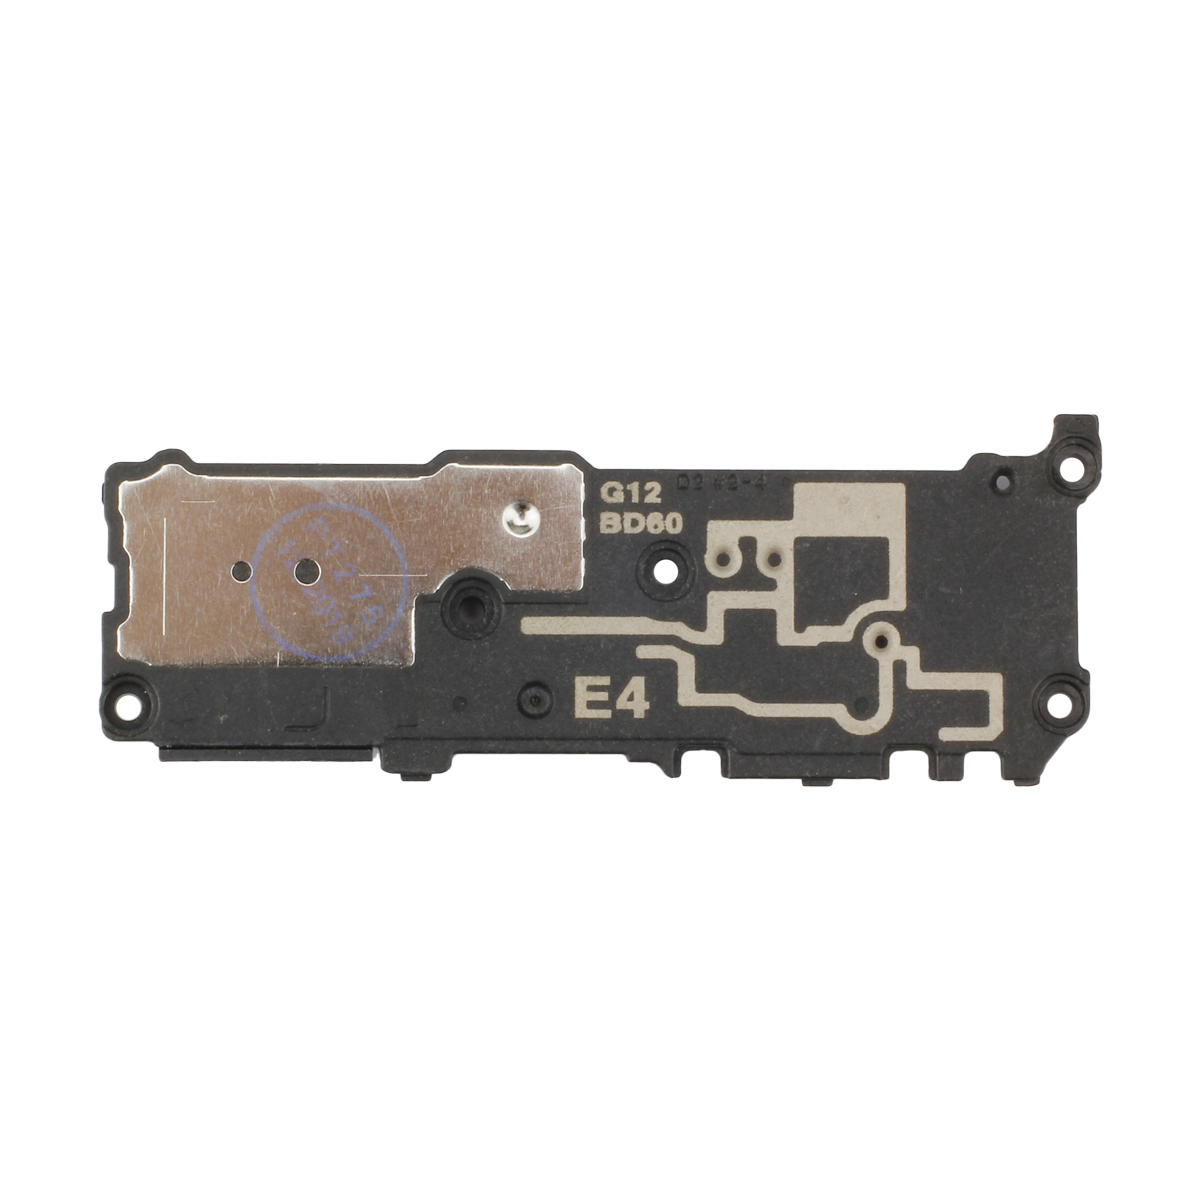 Loudspeaker module compatible with Samsung Galaxy Note 10+ N975F